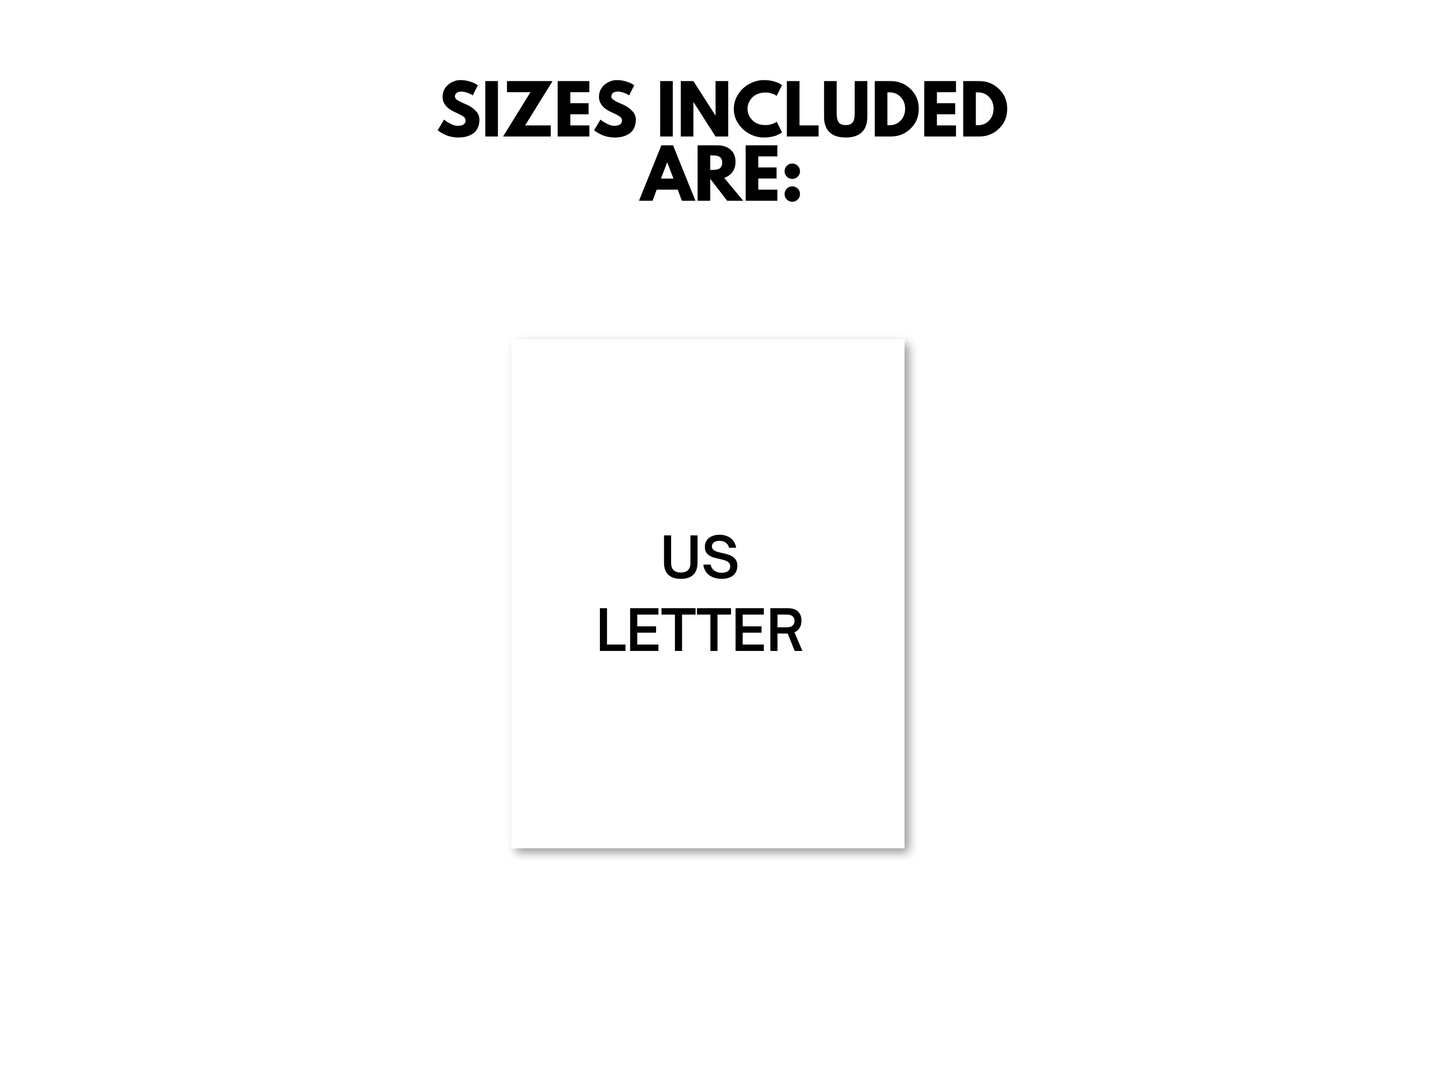 Size statment US letter.